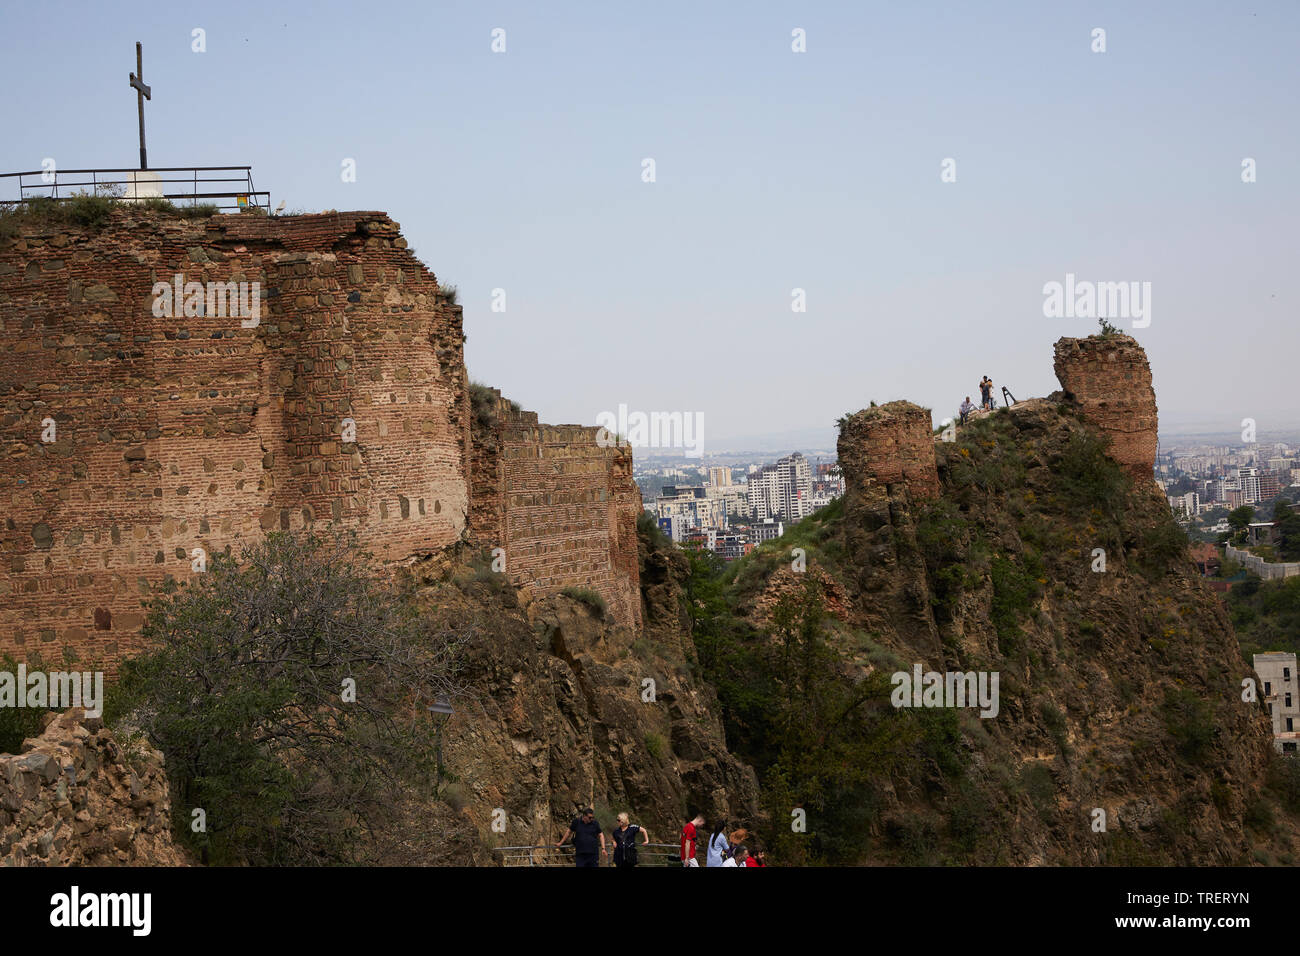 A couple taking a selfie in a ruin in Tblisi Stock Photo